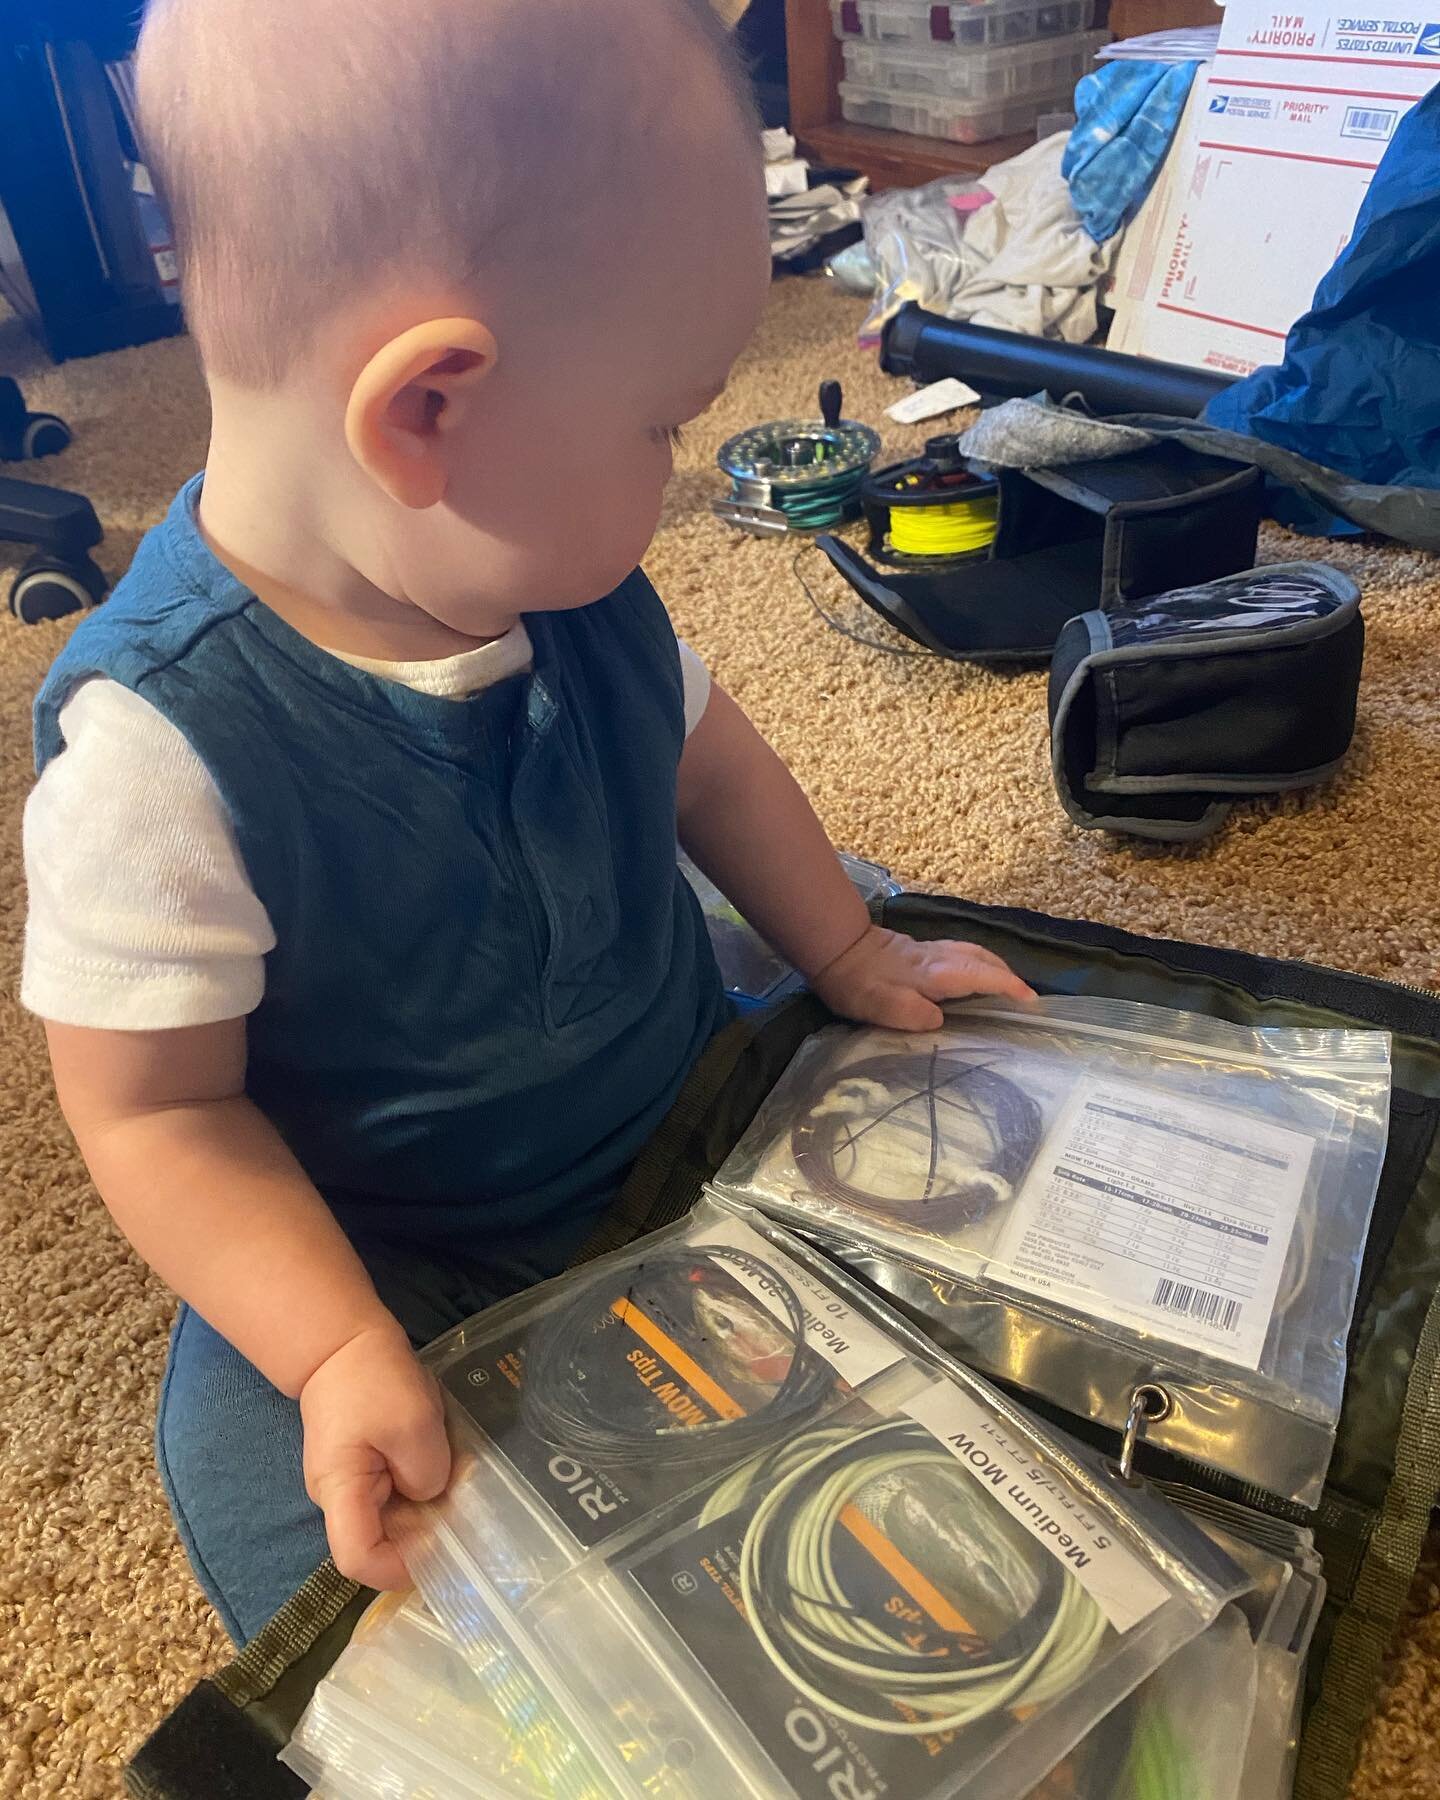 When your 6 month old &ldquo;helps&rdquo; organize the spey gear&hellip; 

#flyfishing #thetugisthedrug #fishca #troutfishing #norcalflyfishing